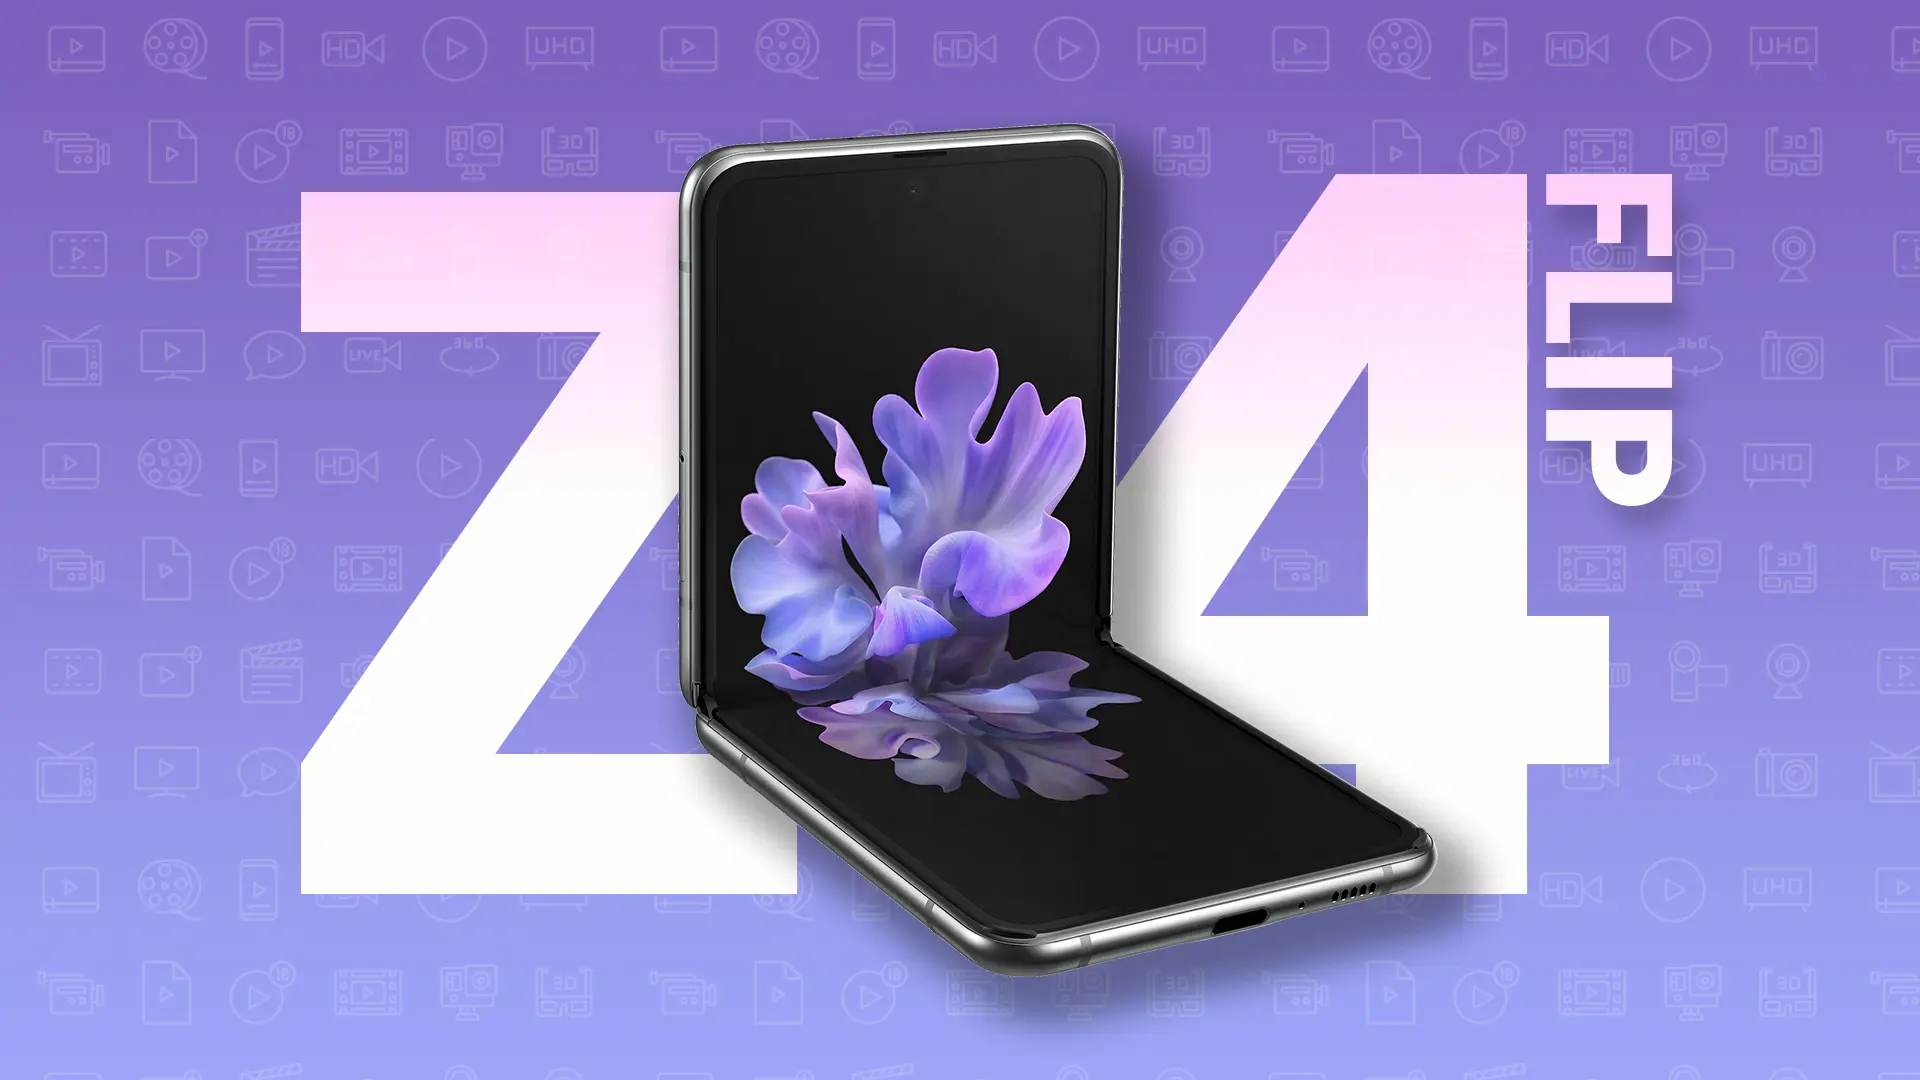 Download the official Samsung Galaxy Z Flip wallpapers here  9to5Google